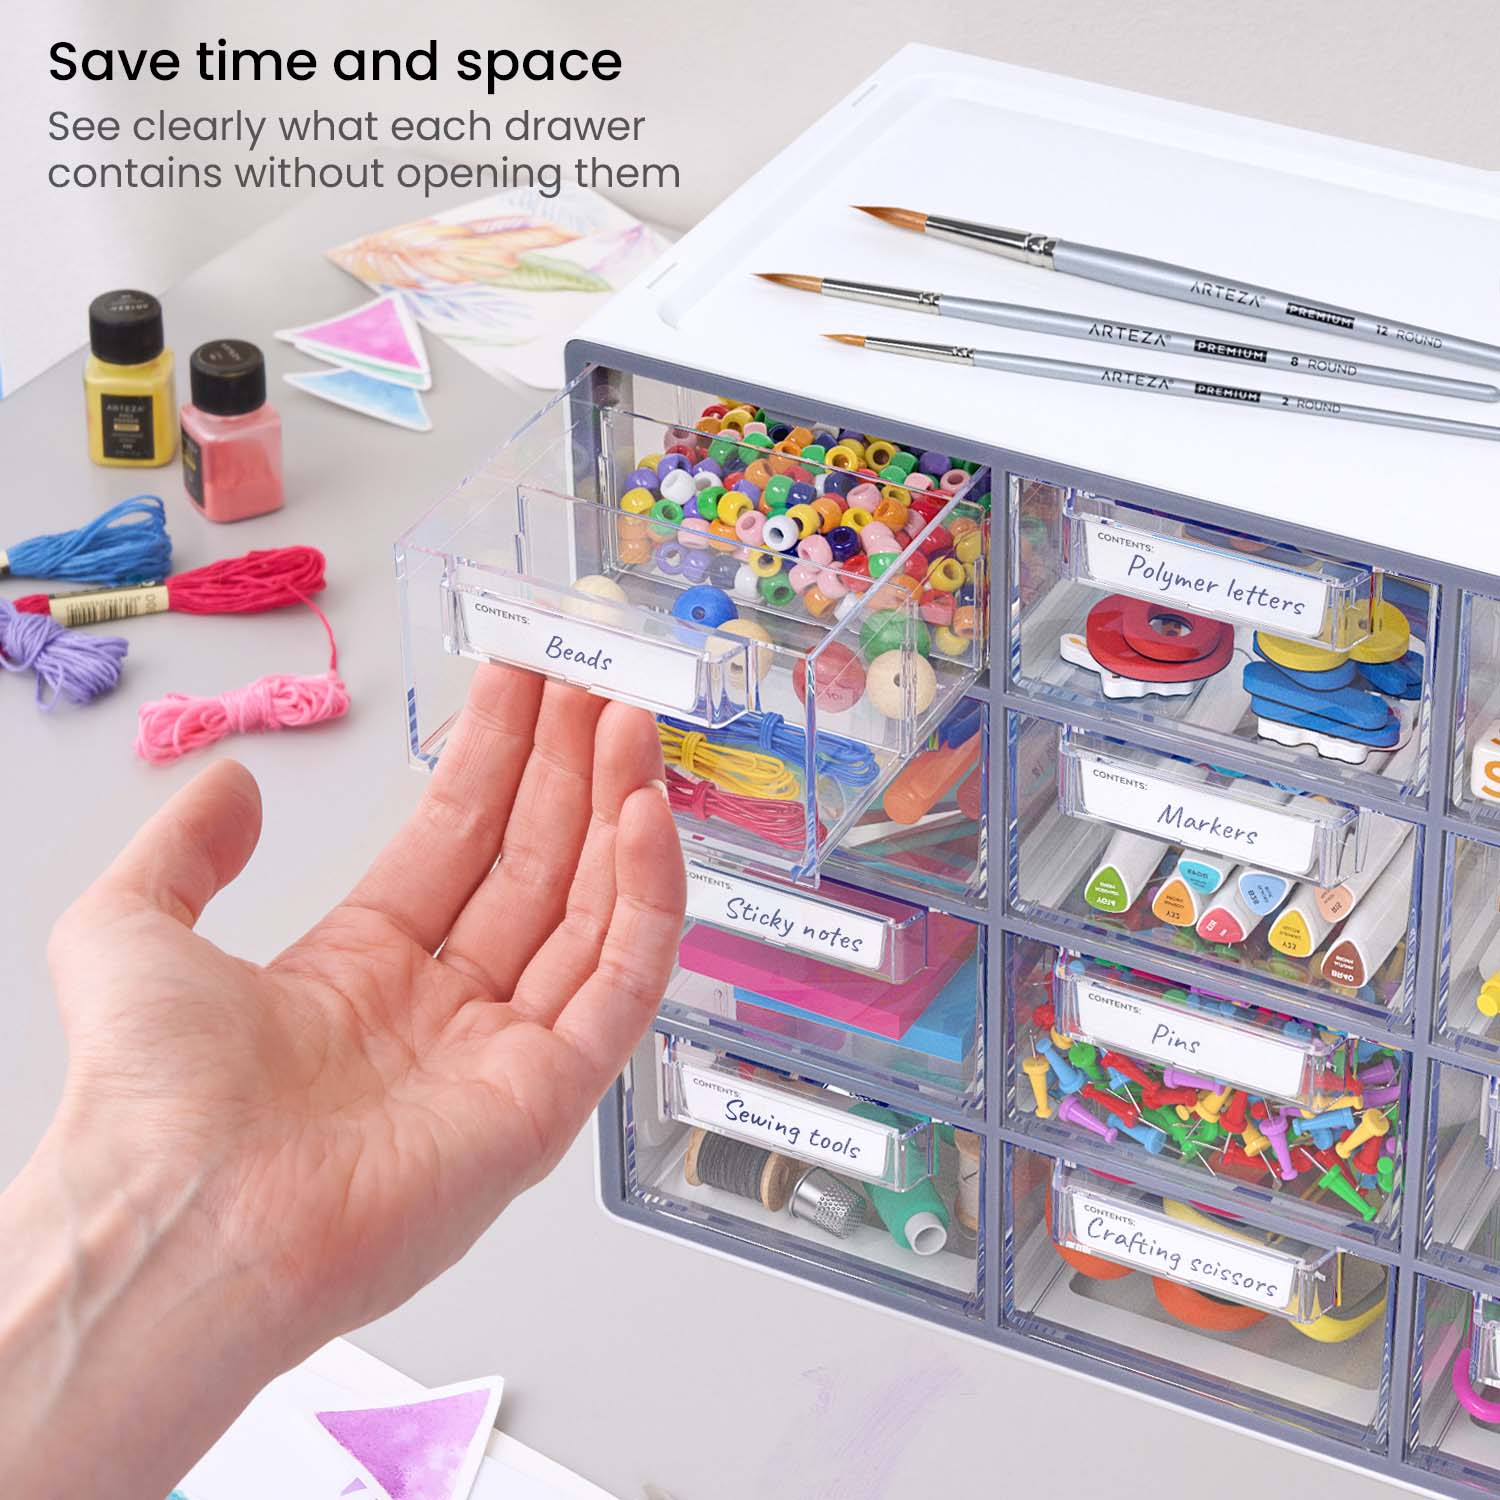 Plastic Storage Drawers – 42 Compartment Organizer – Desktop or Wall Mount  Container for Hardware, Parts, Crafts, Beads, or Tools by Stalwart, 10